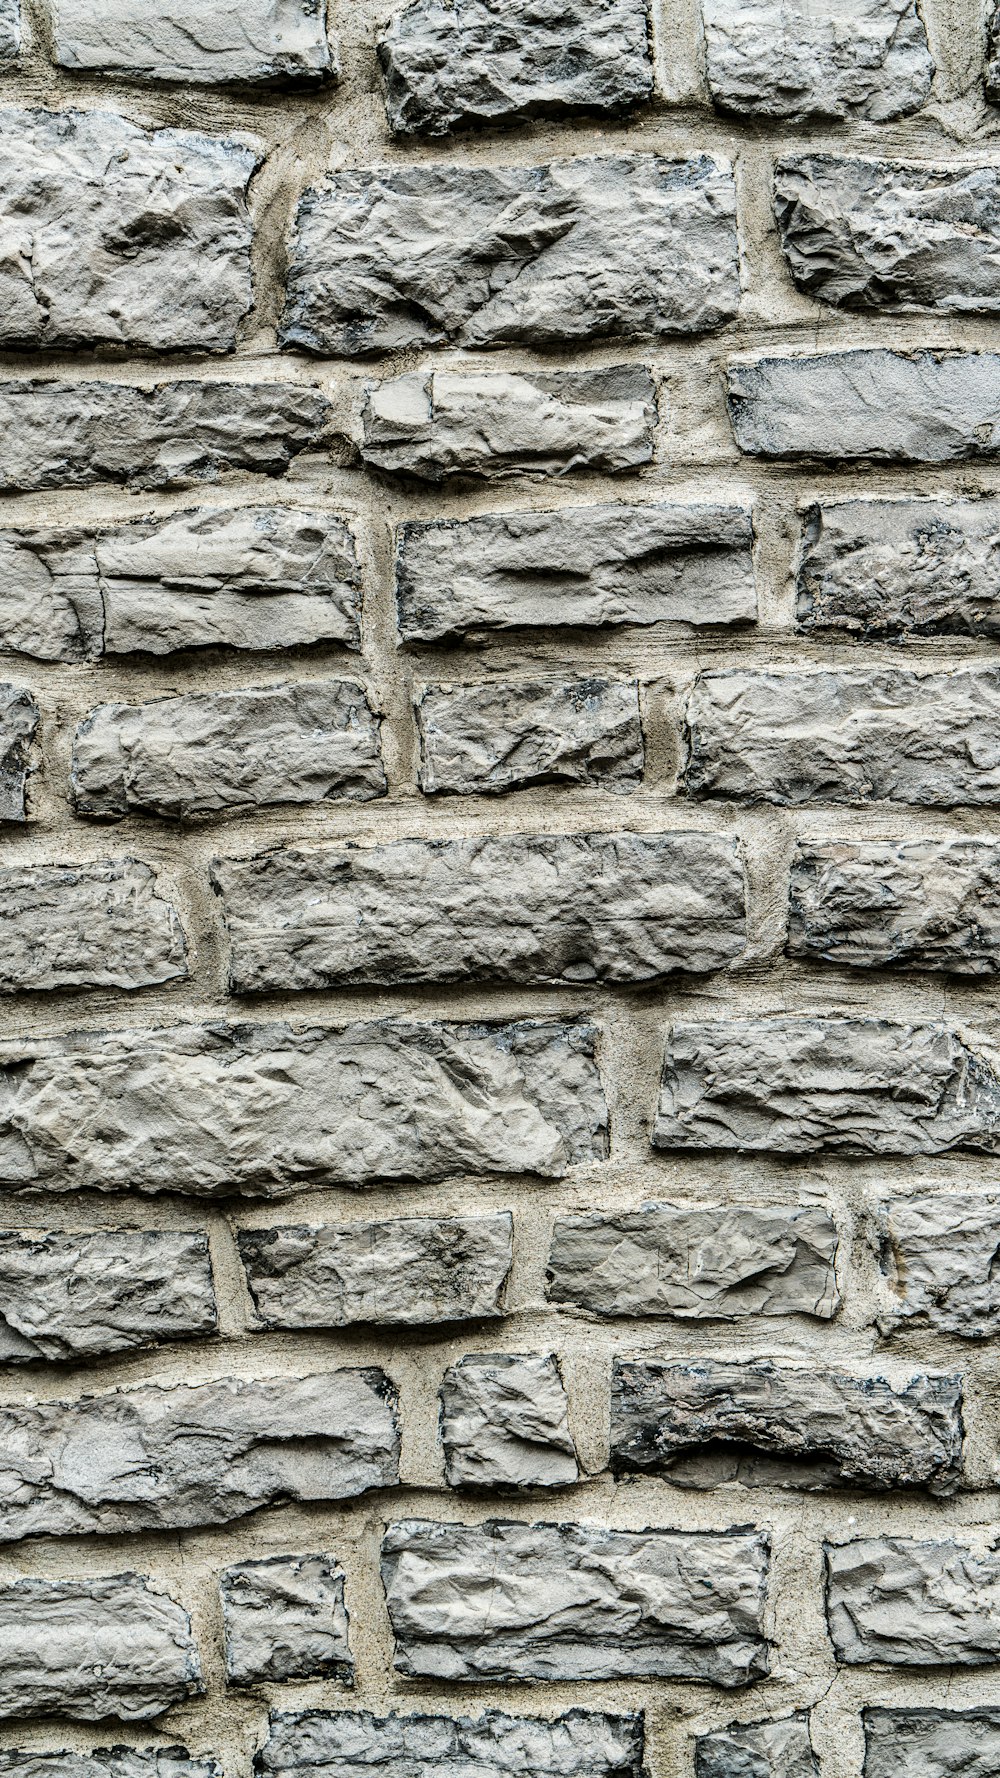 a close up of a brick wall made of stone